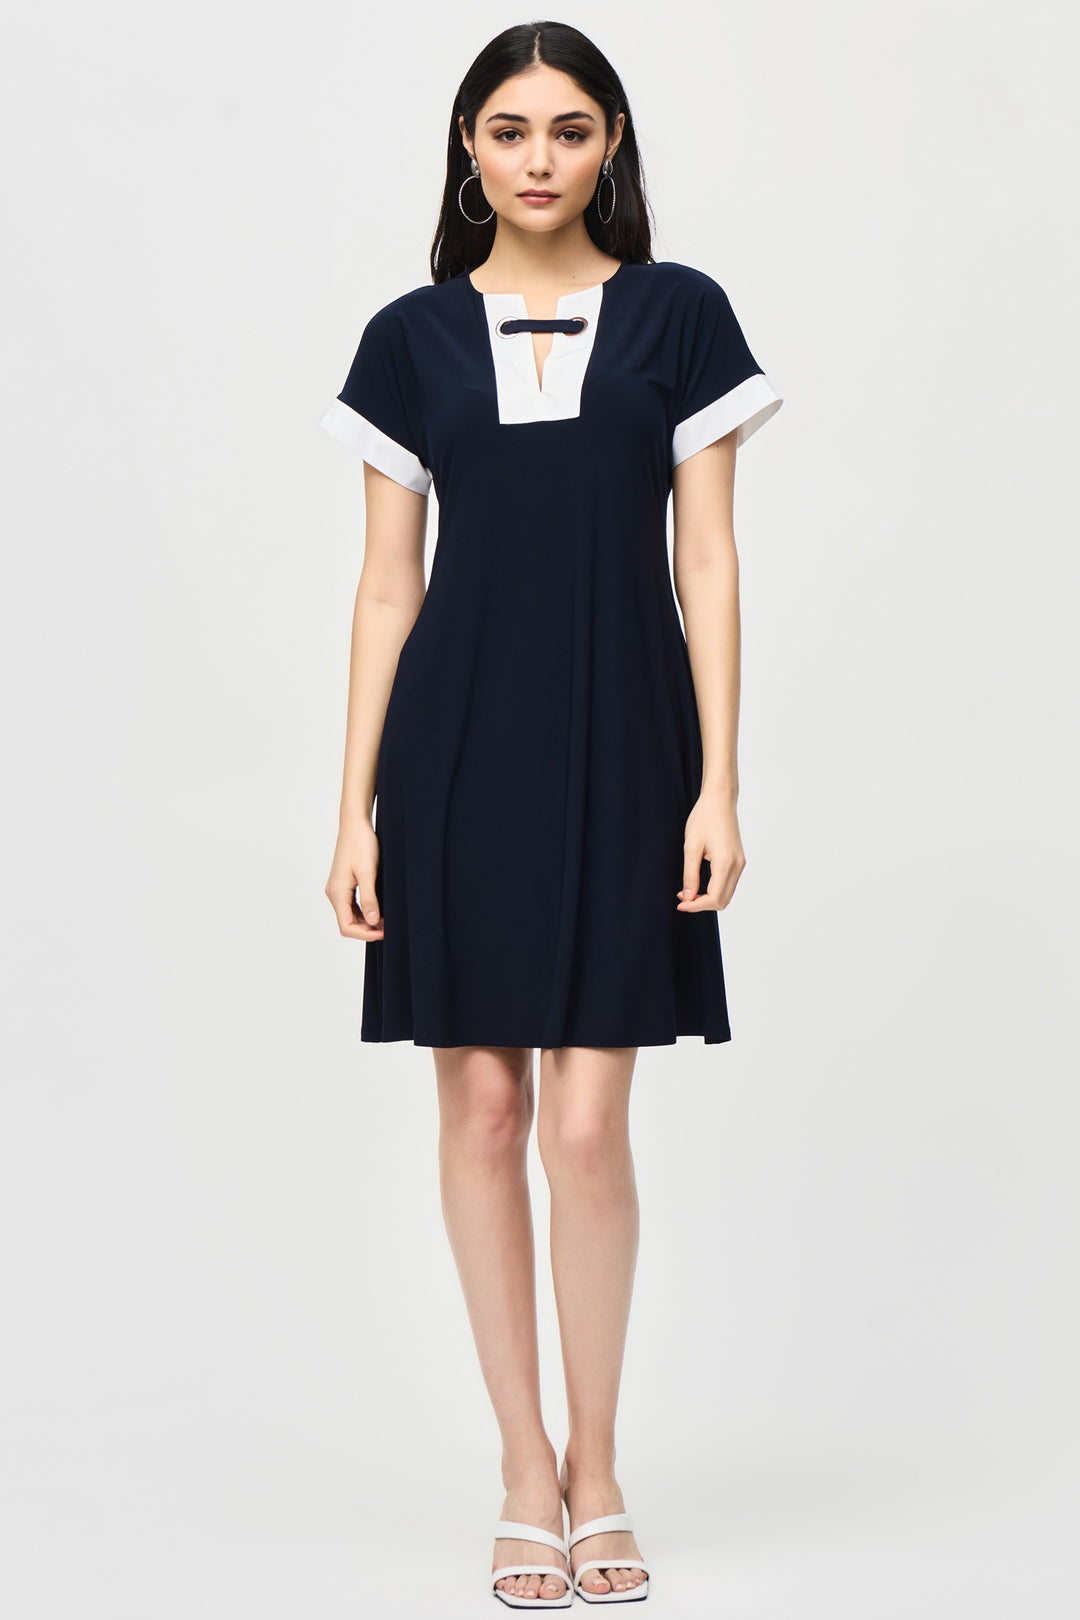 Joseph Ribkoff Summer 2024  Made from soft knit fabric, it falls above the knee and includes side seam pockets for added convenience. Stay stylish and comfortable with this versatile dress. 